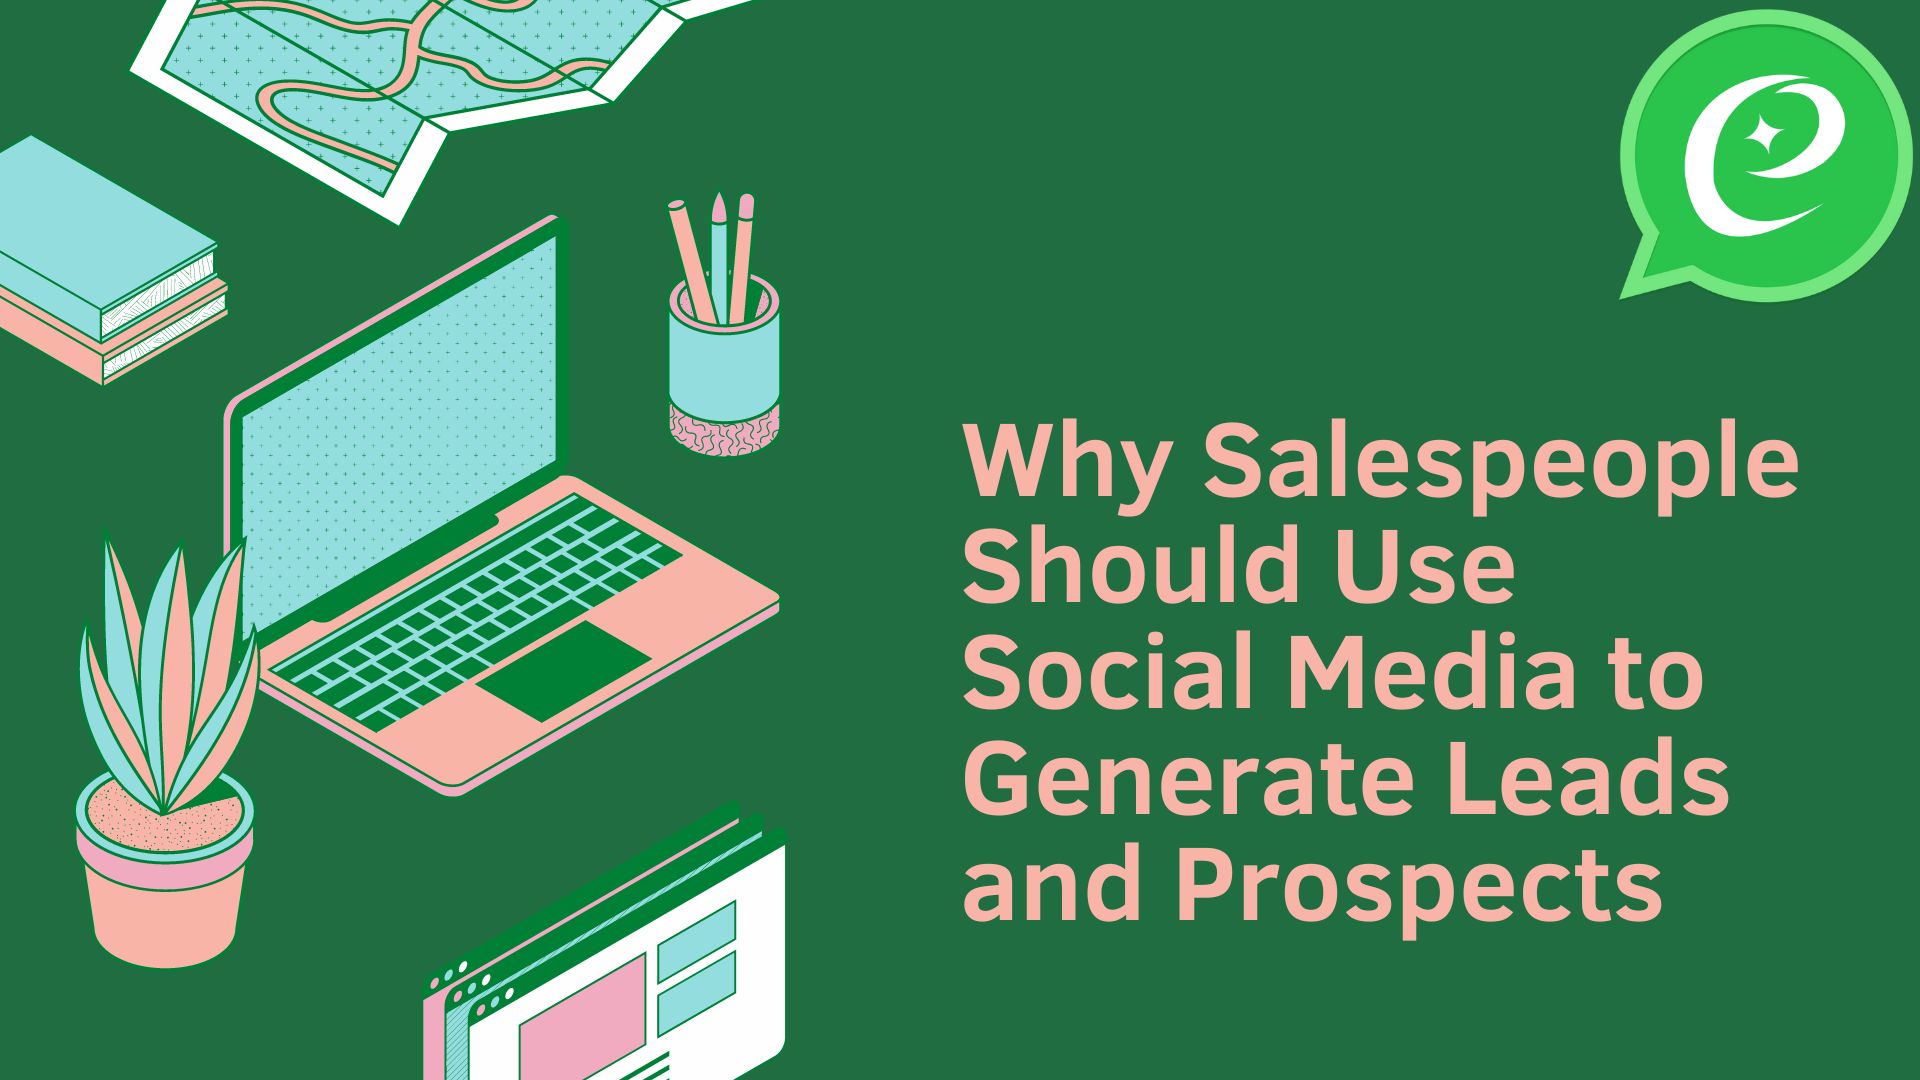 Why Salespeople Should Use Social Media to Generate Leads and Prospects